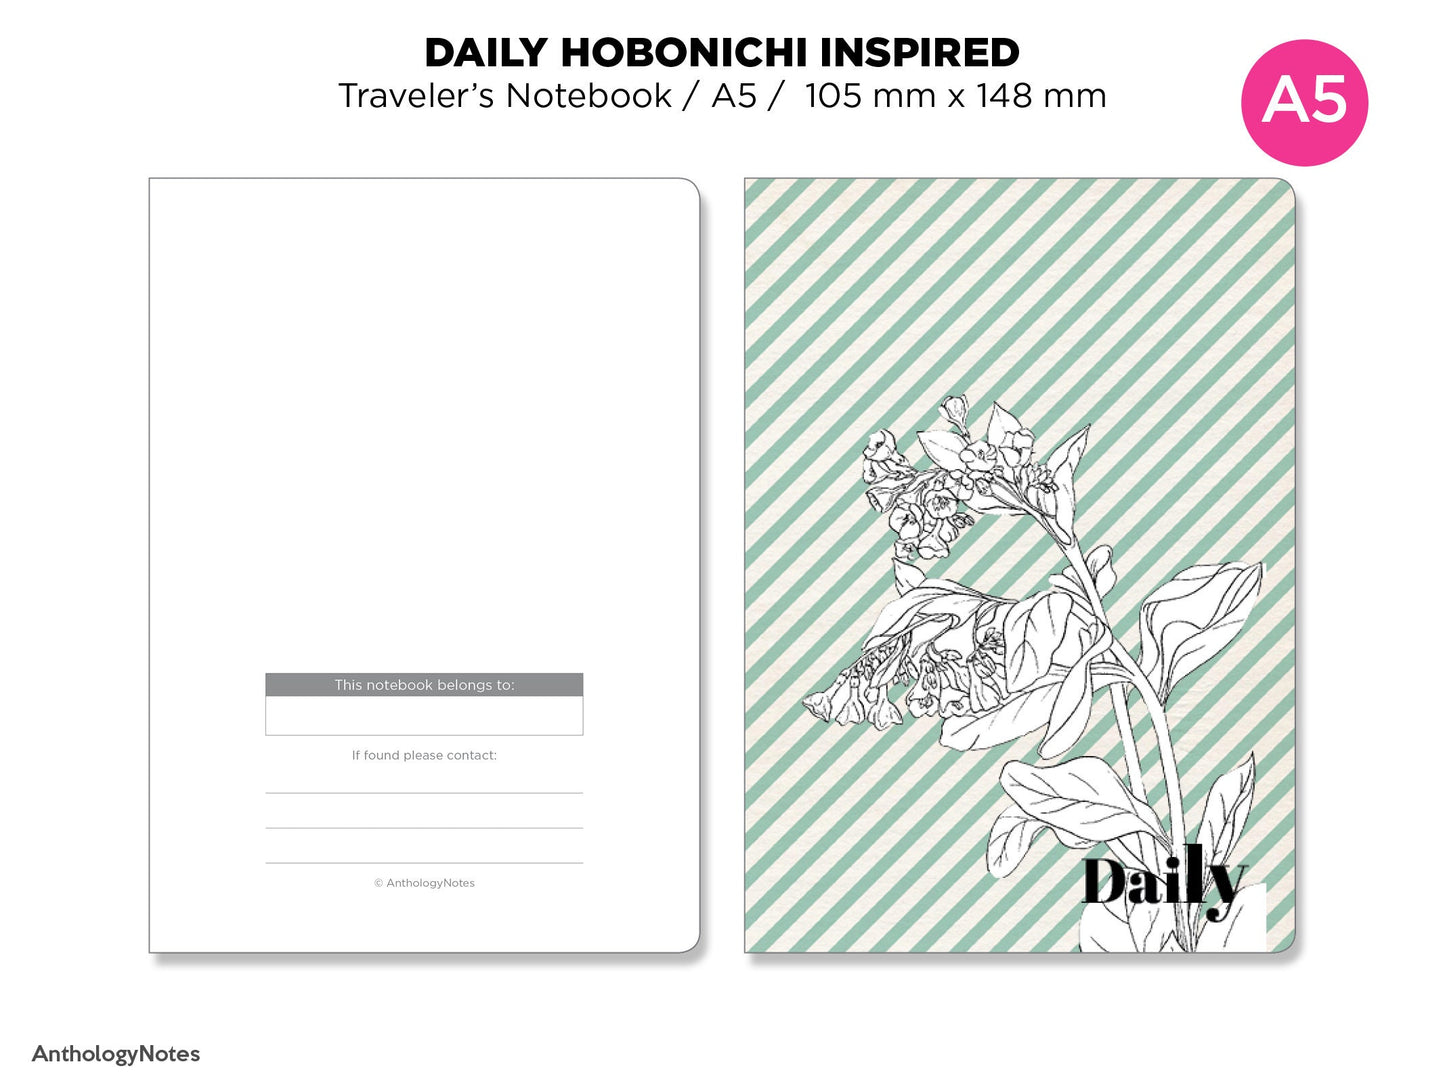 A5 Daily View Grid Traveler's Notebook Printable Insert - Do1P - Minimalist - Functional HOBONICHI Inspired